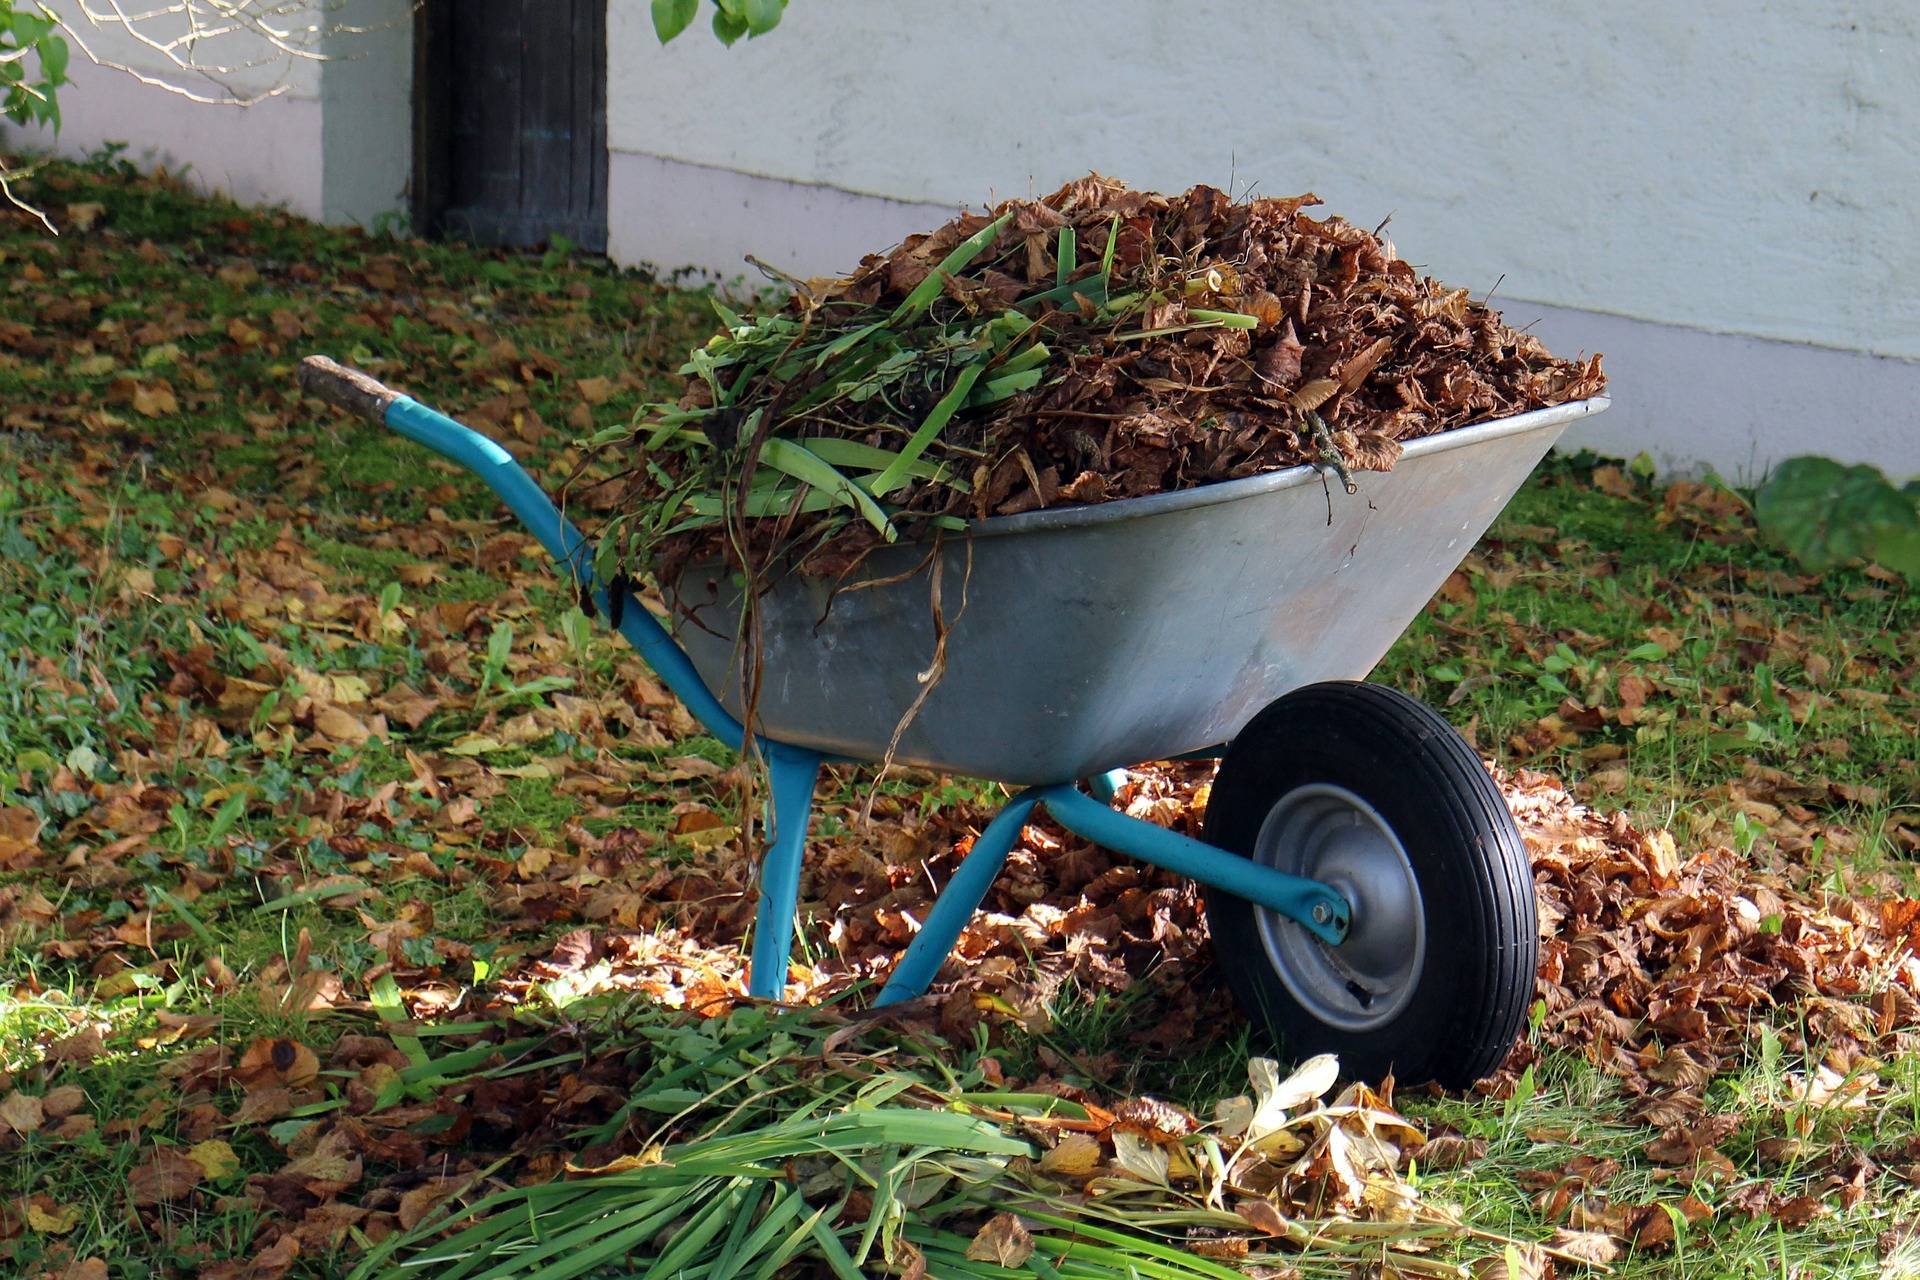 A Cheap Green Waste Removal Service for Large Quantities of Green Waste